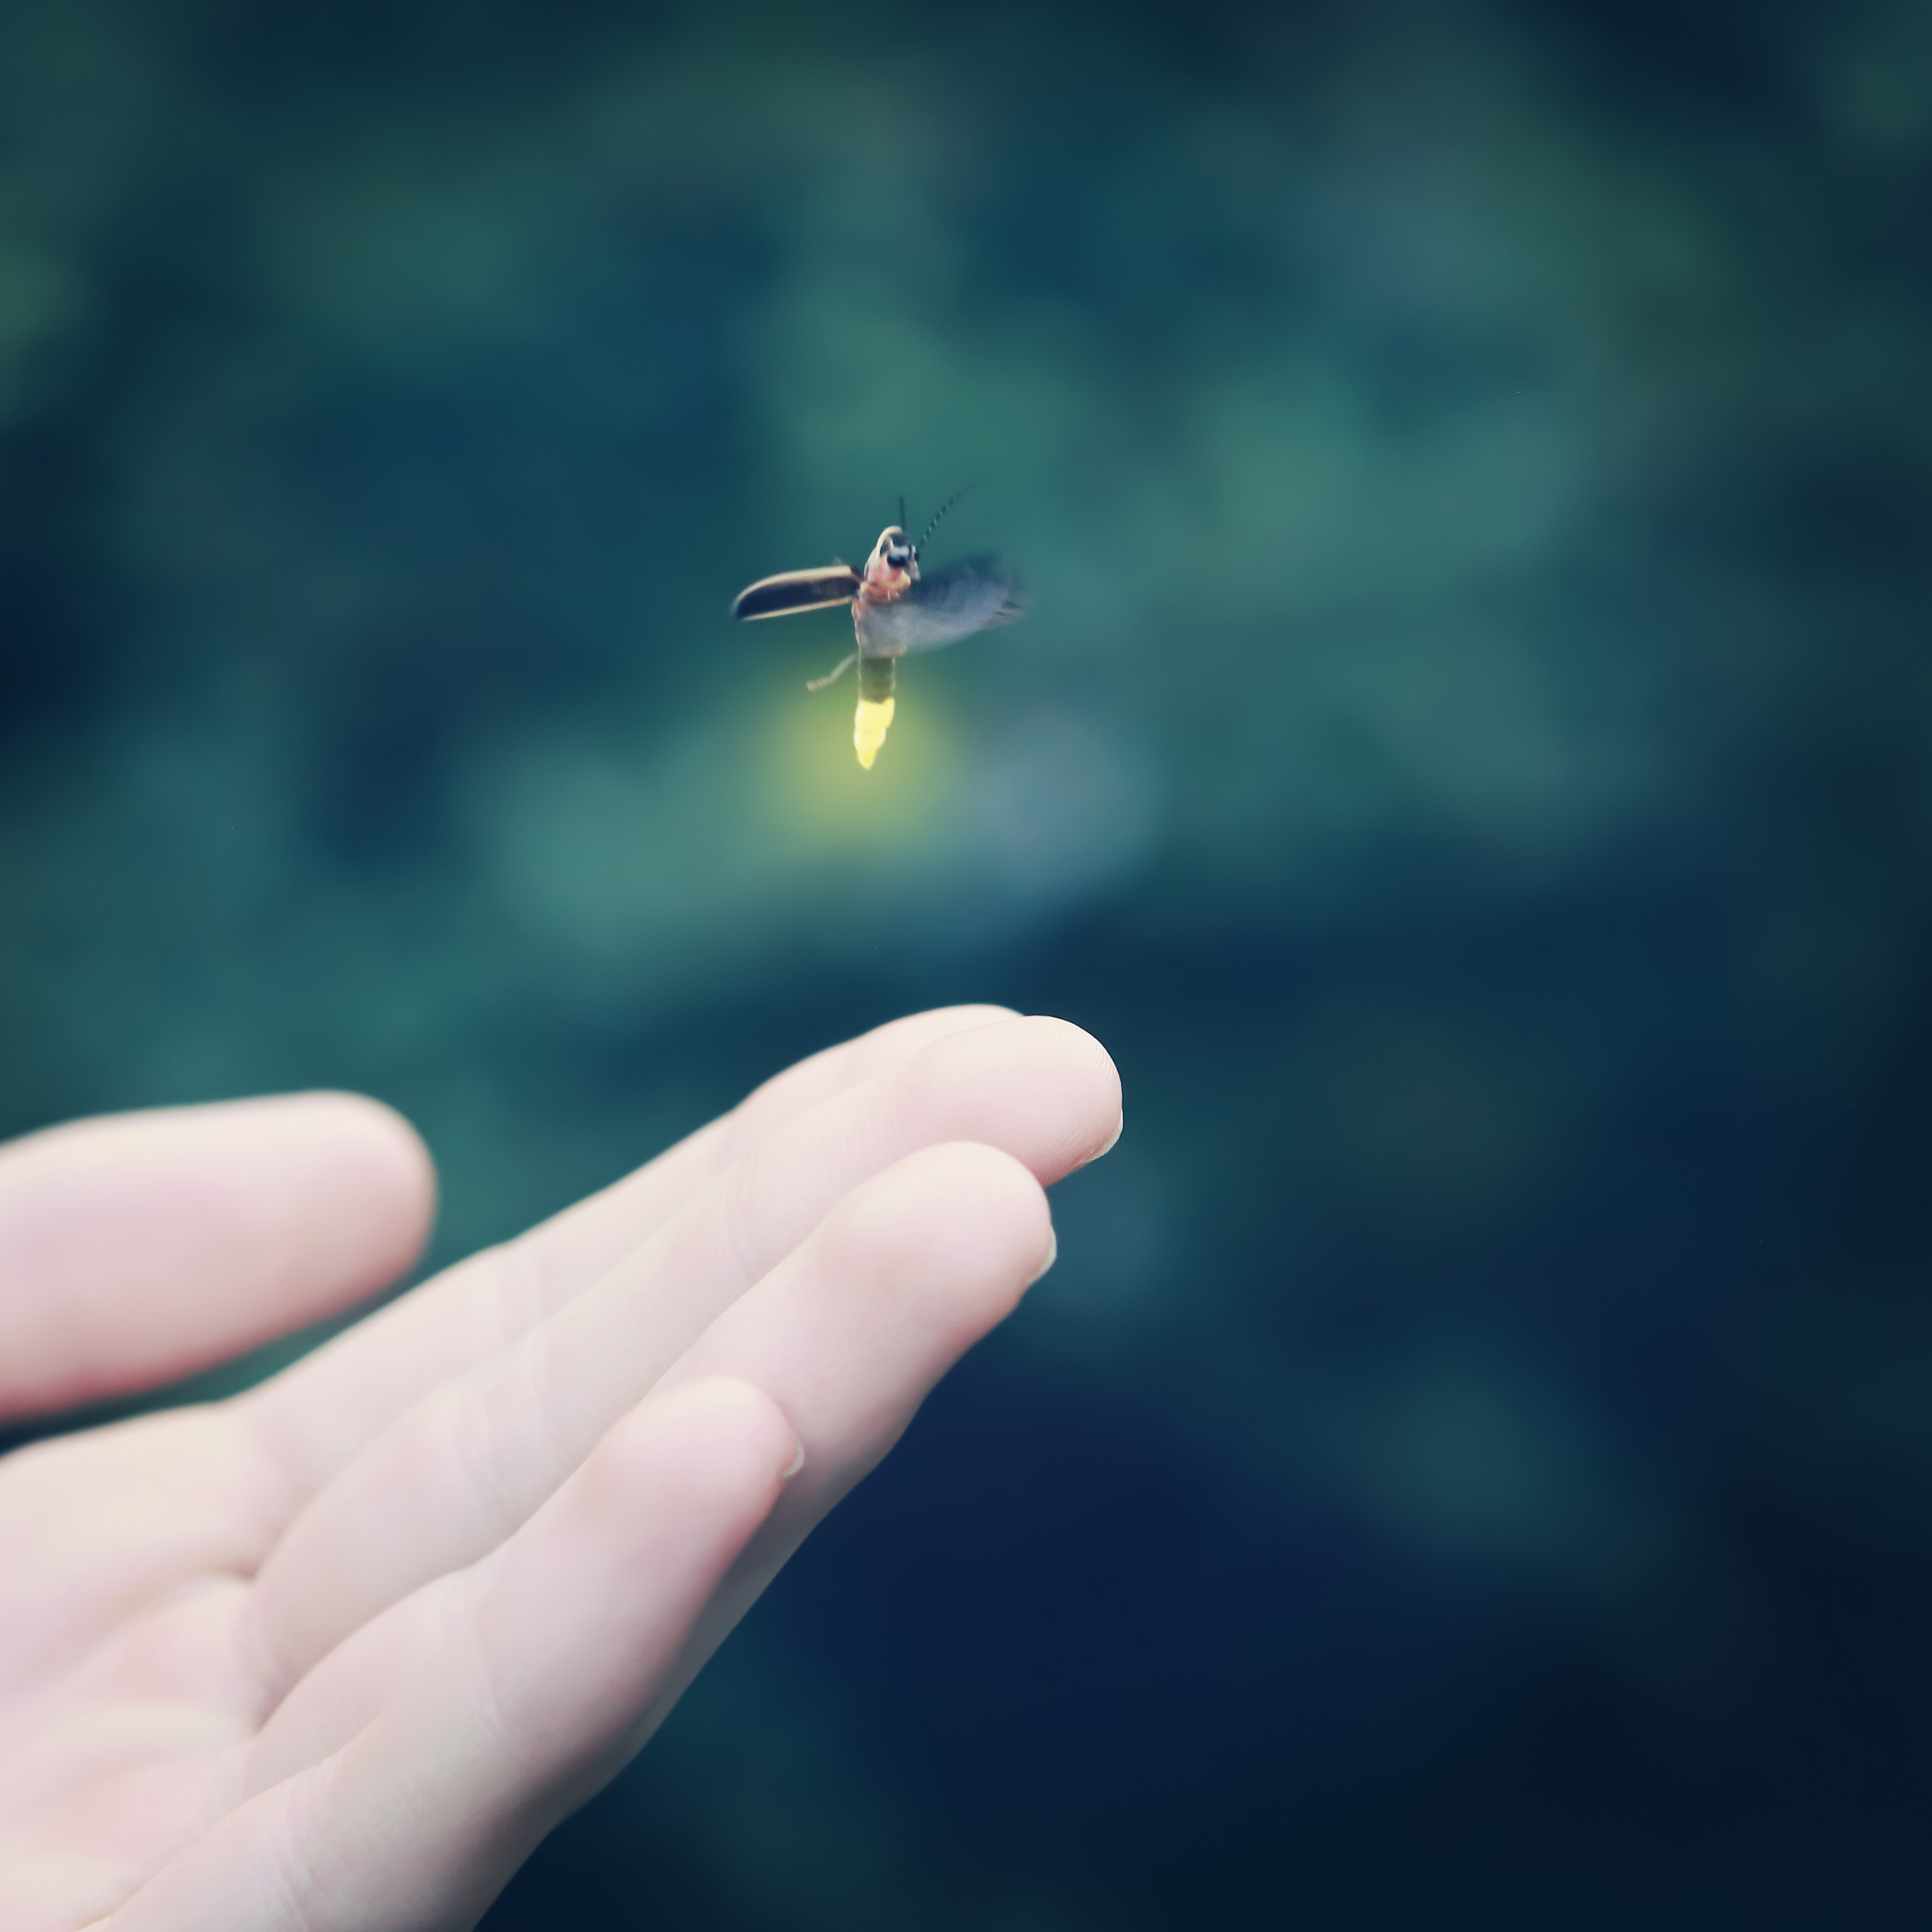 A child's hand reaches up to under a flying flirefly